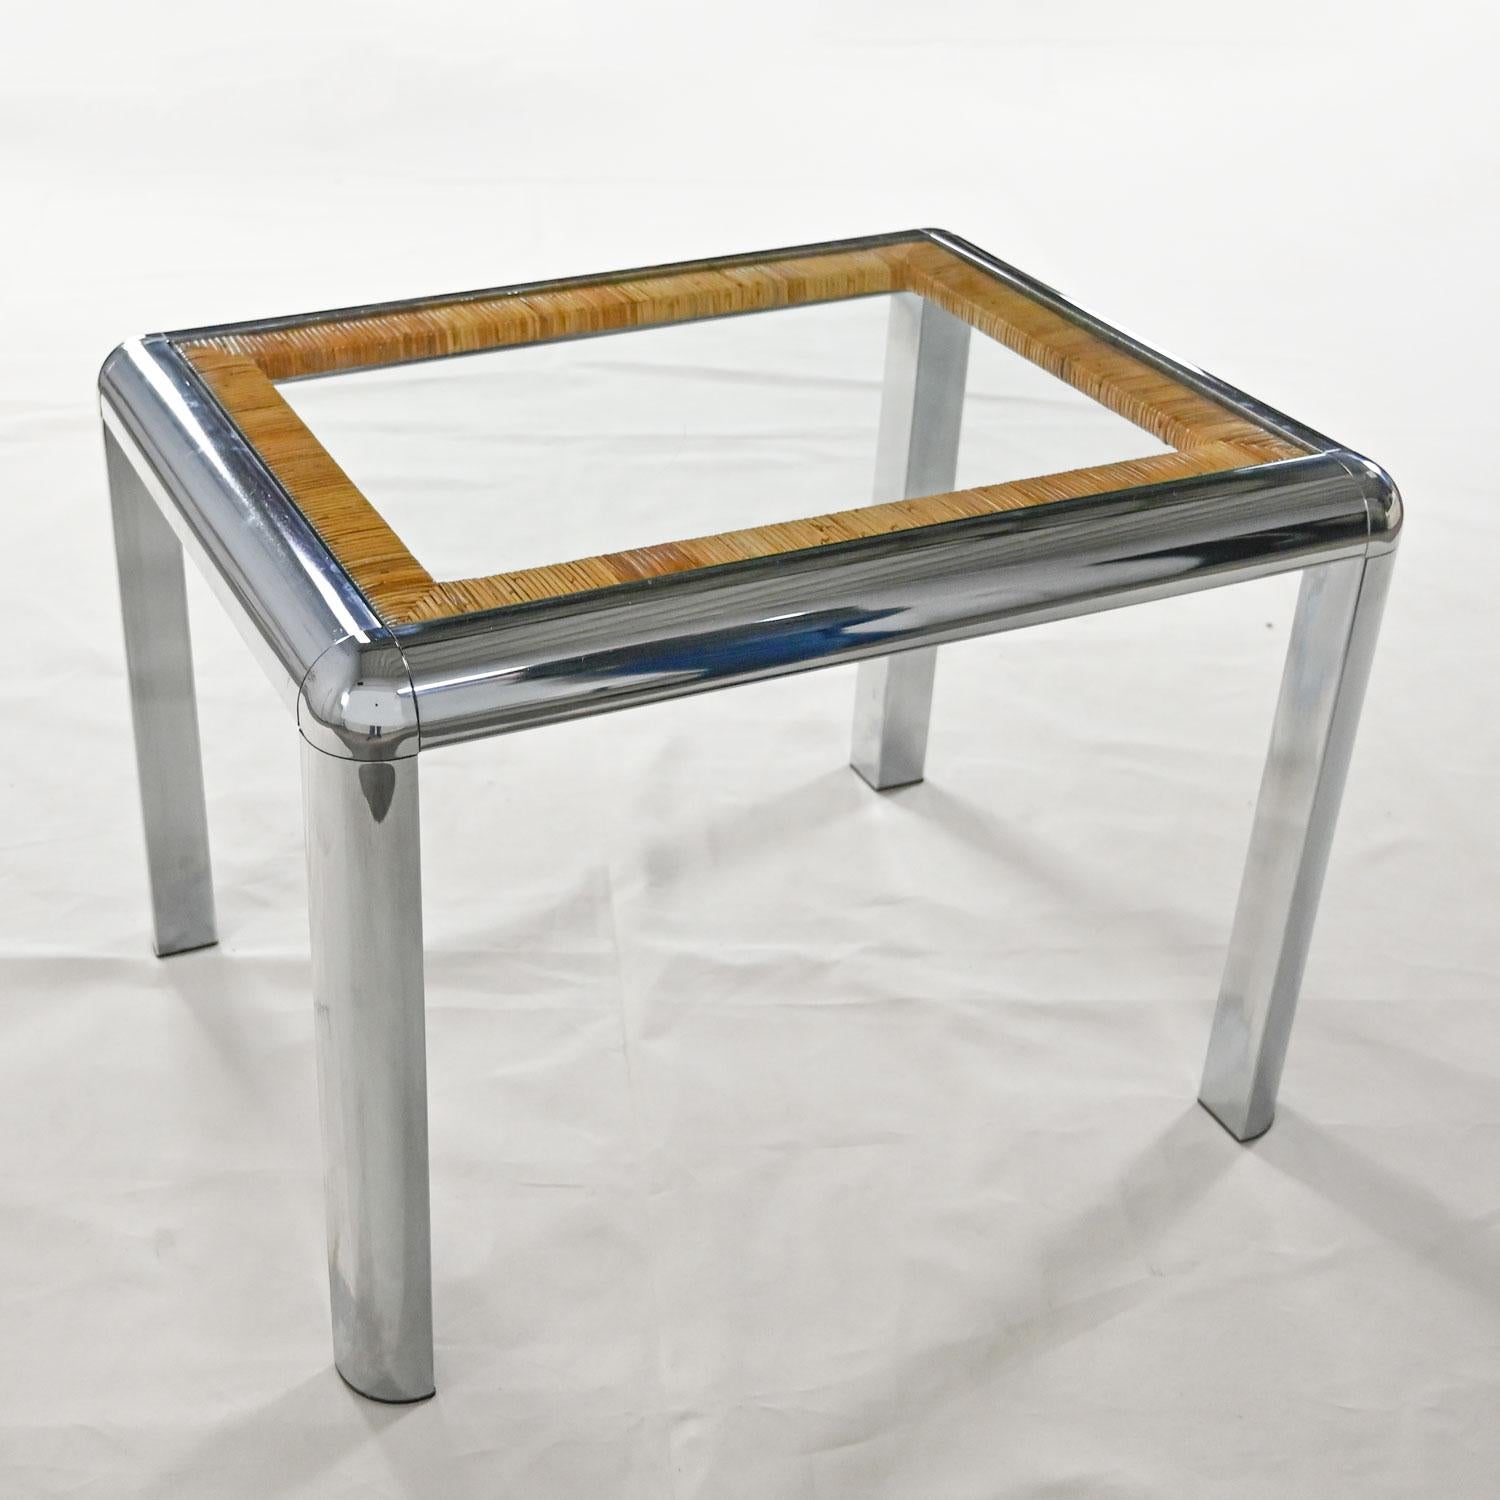 Vintage Modern Rectangular Chrome Glass & Wrapped Rattan Side Table Attr to DIA For Sale 10